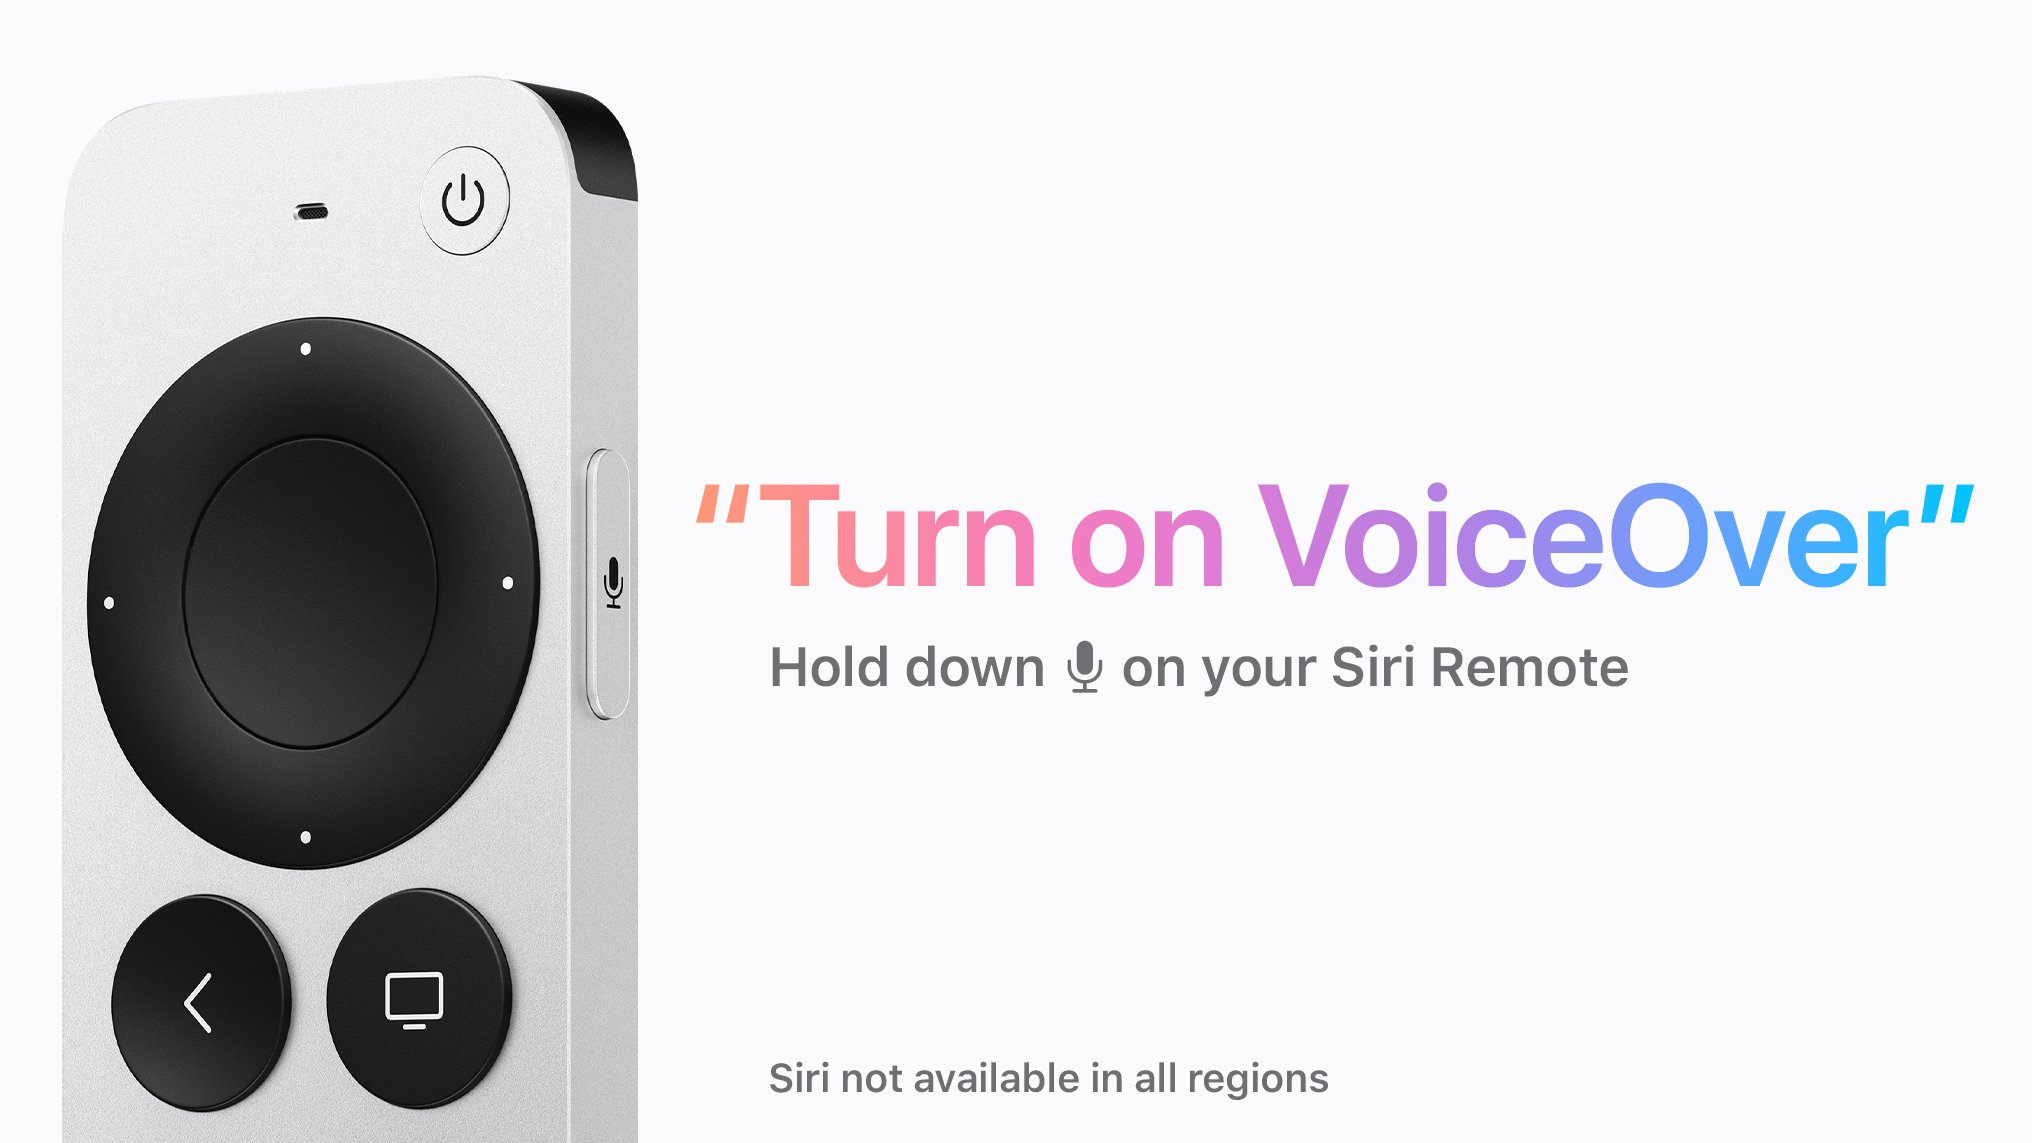 Apple Support on Twitter: "You can use VoiceOver to control Apple TV,  hearing each menu item as you navigate with the Siri Remote. To turn it on,  hold down the Siri button